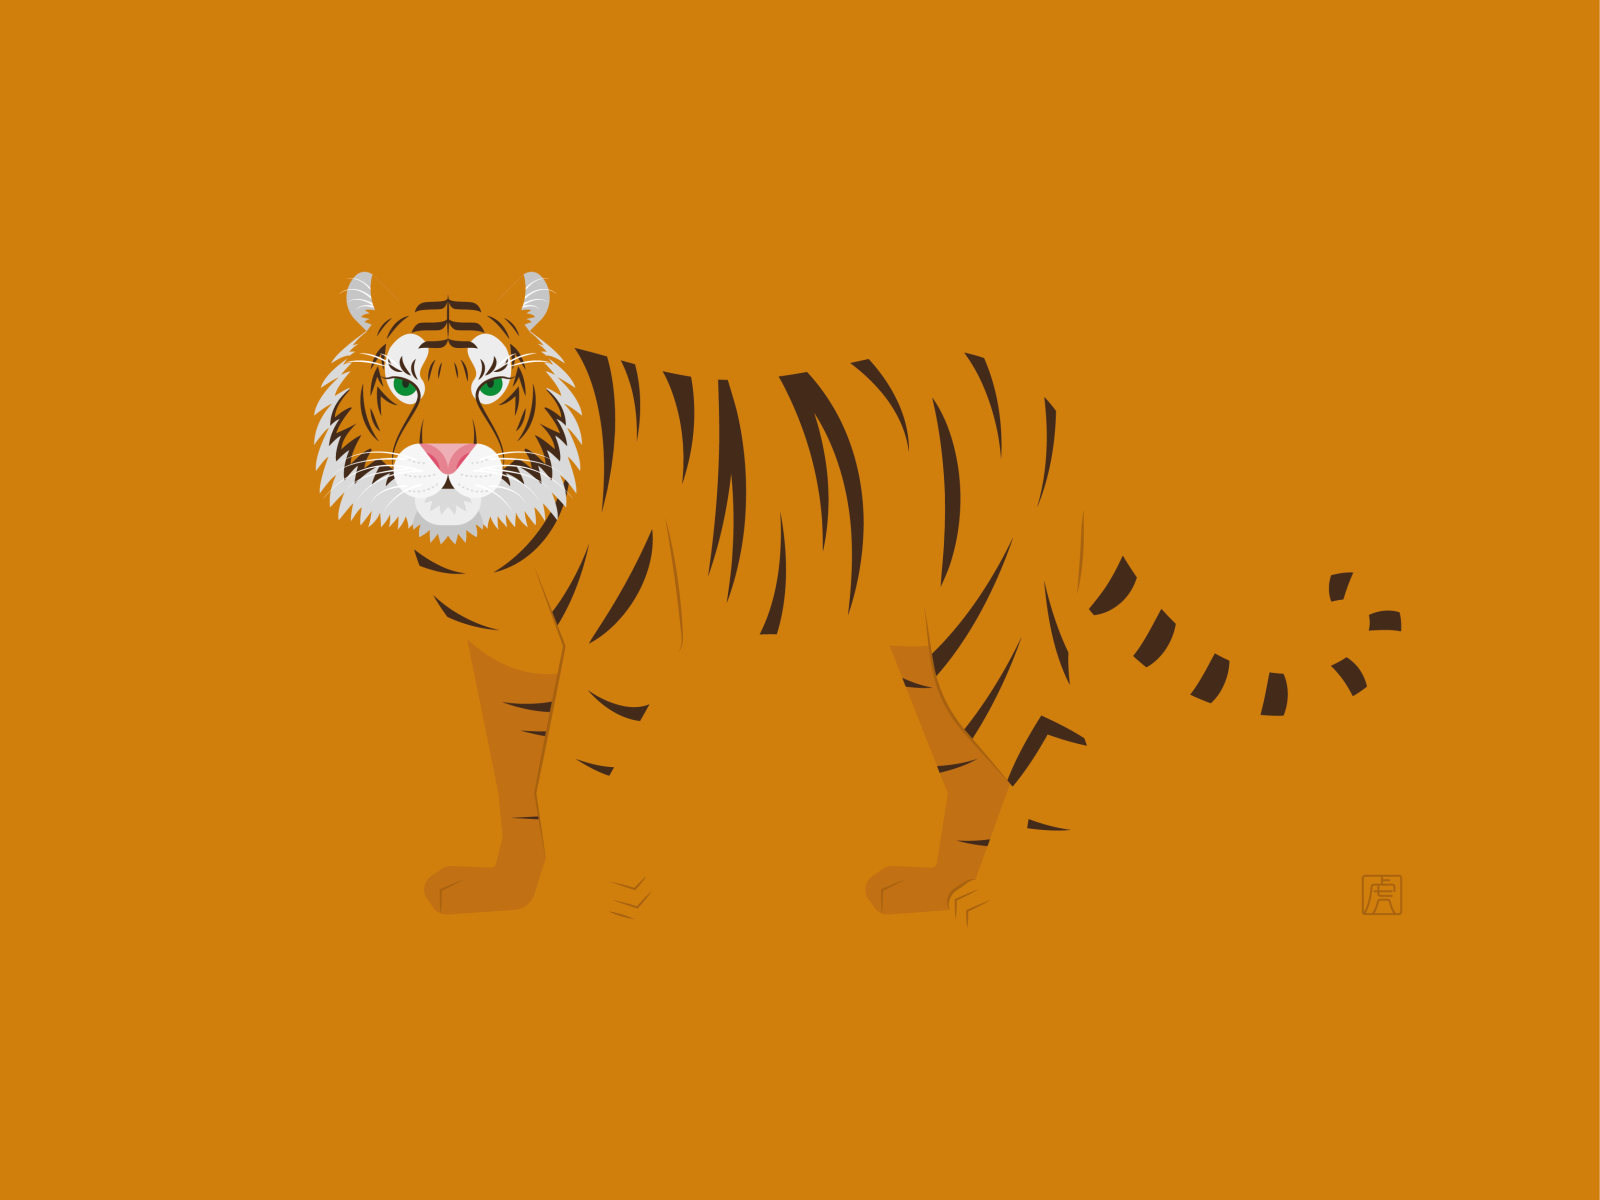 Year of the Tiger by Yuelan Liu on Dribbble